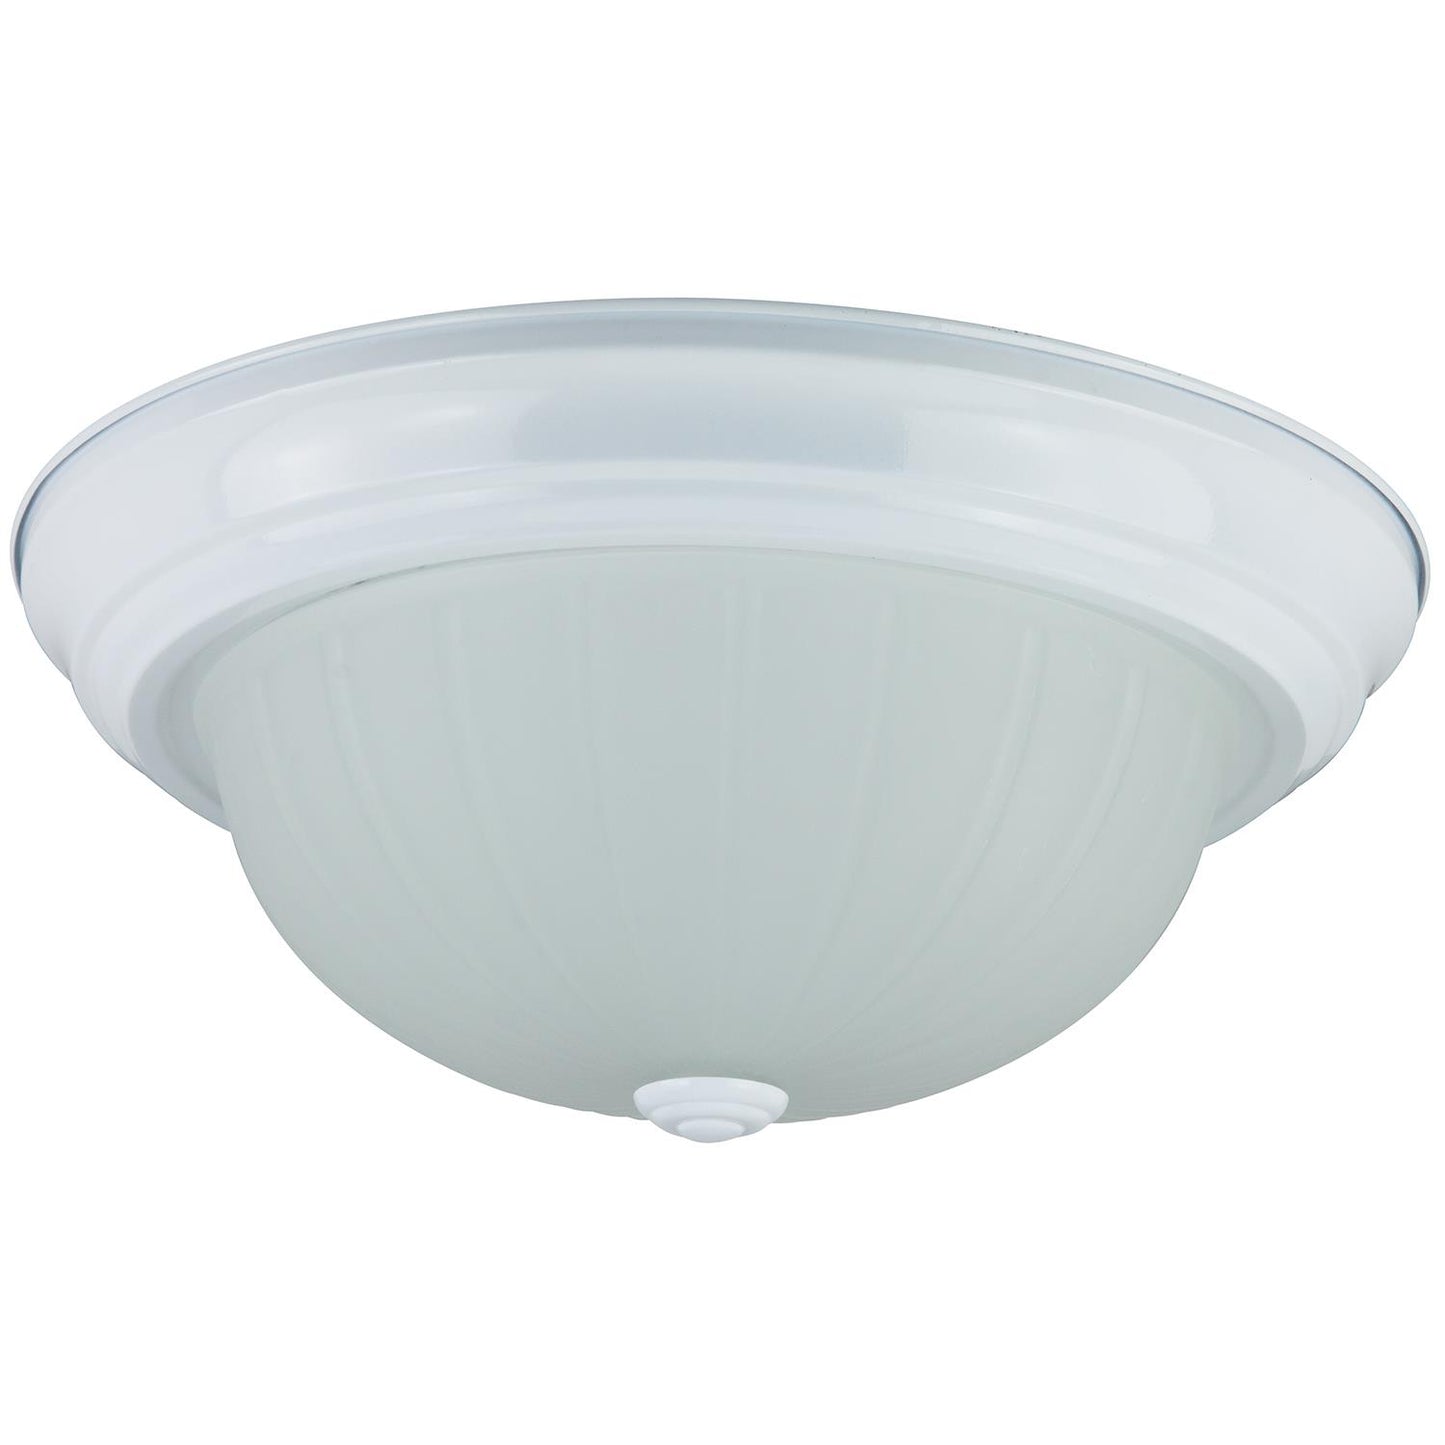 Sunlite 13" Energy Saving Dome Fixture, Smooth White Finish, Frosted Glass